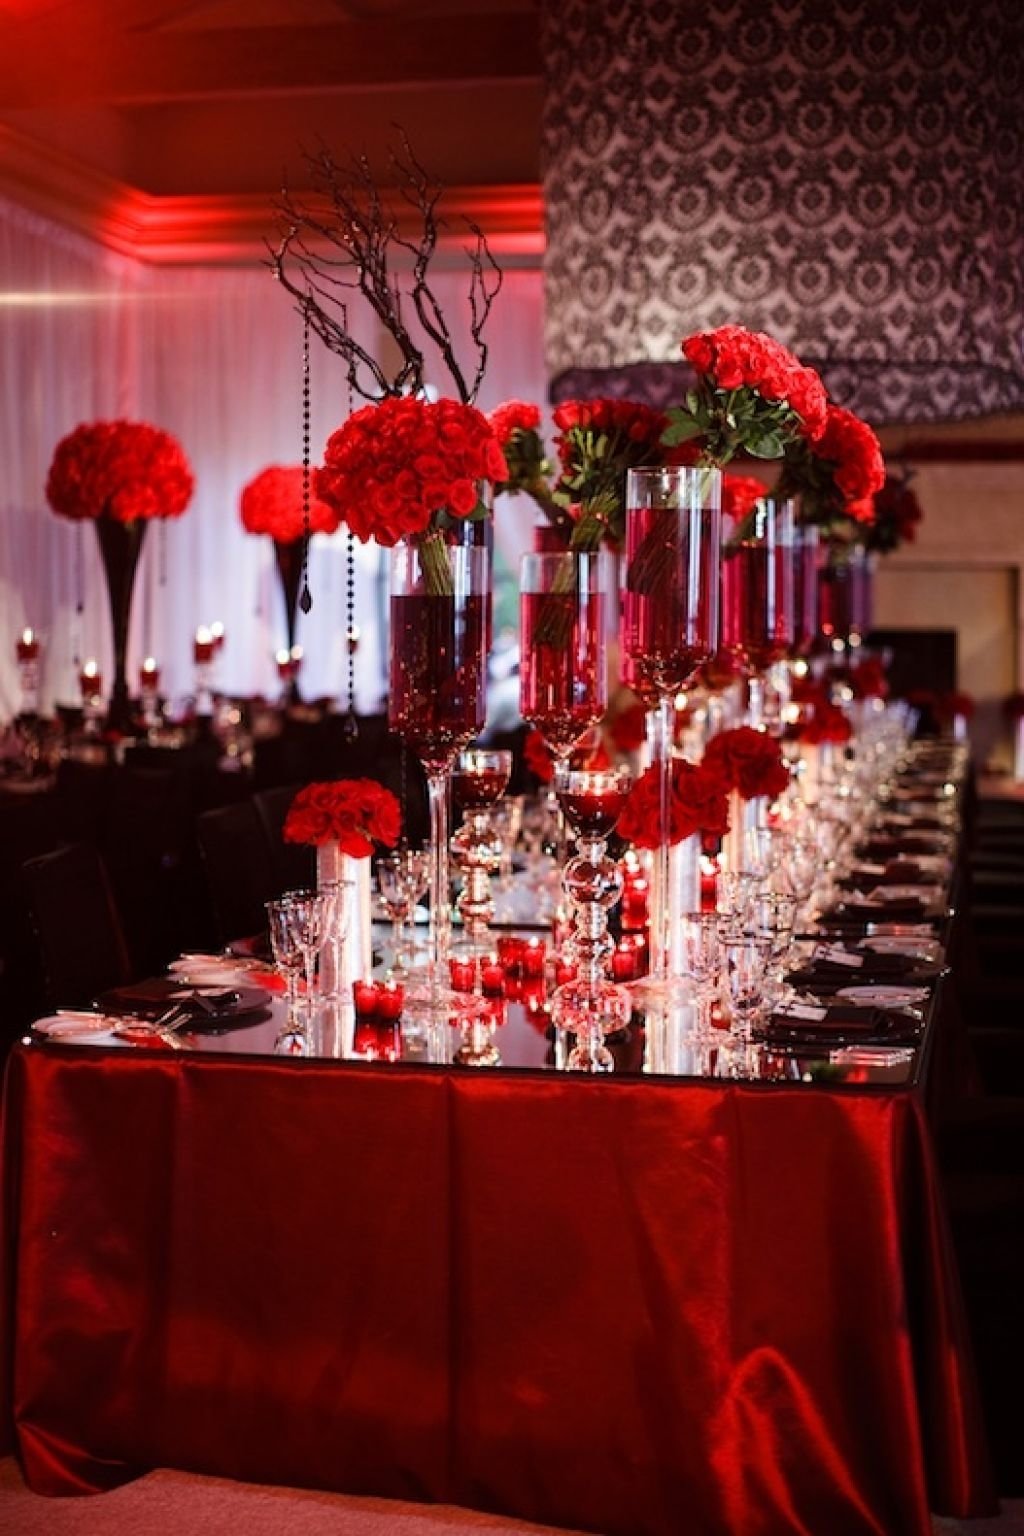 10 Nice Black White And Red Wedding Ideas red white and black wedding table decorating ideas wedding in 3 2022